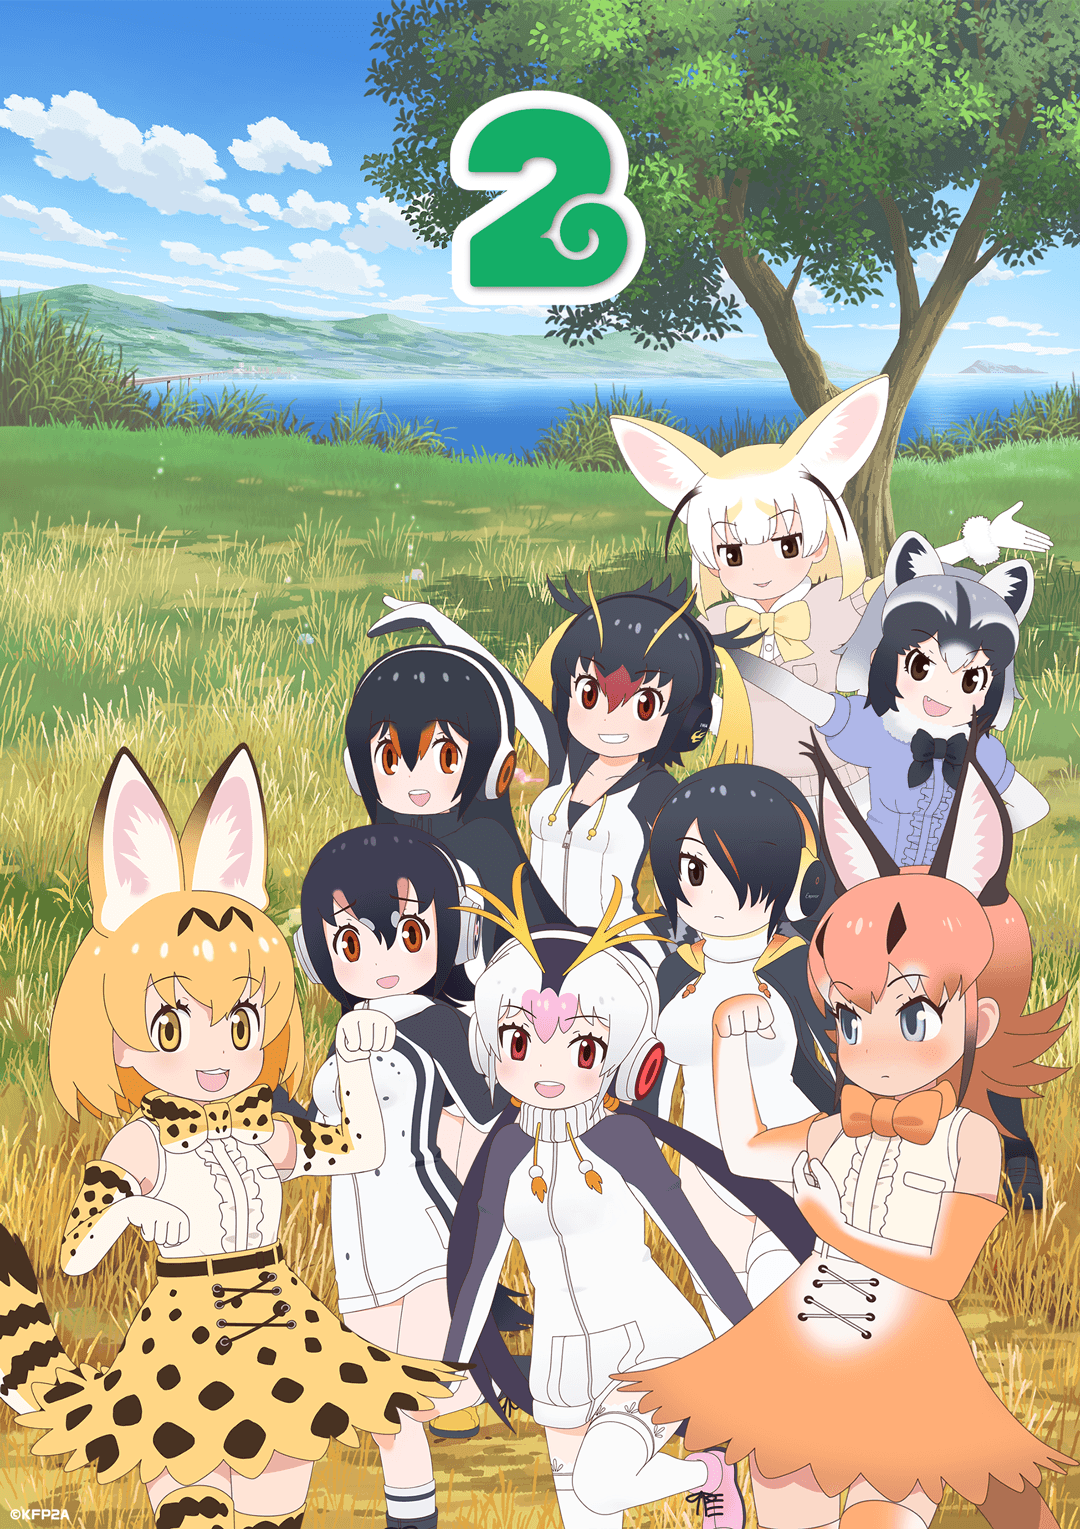 Another update for the âKemono Friends 2â main anime visual.